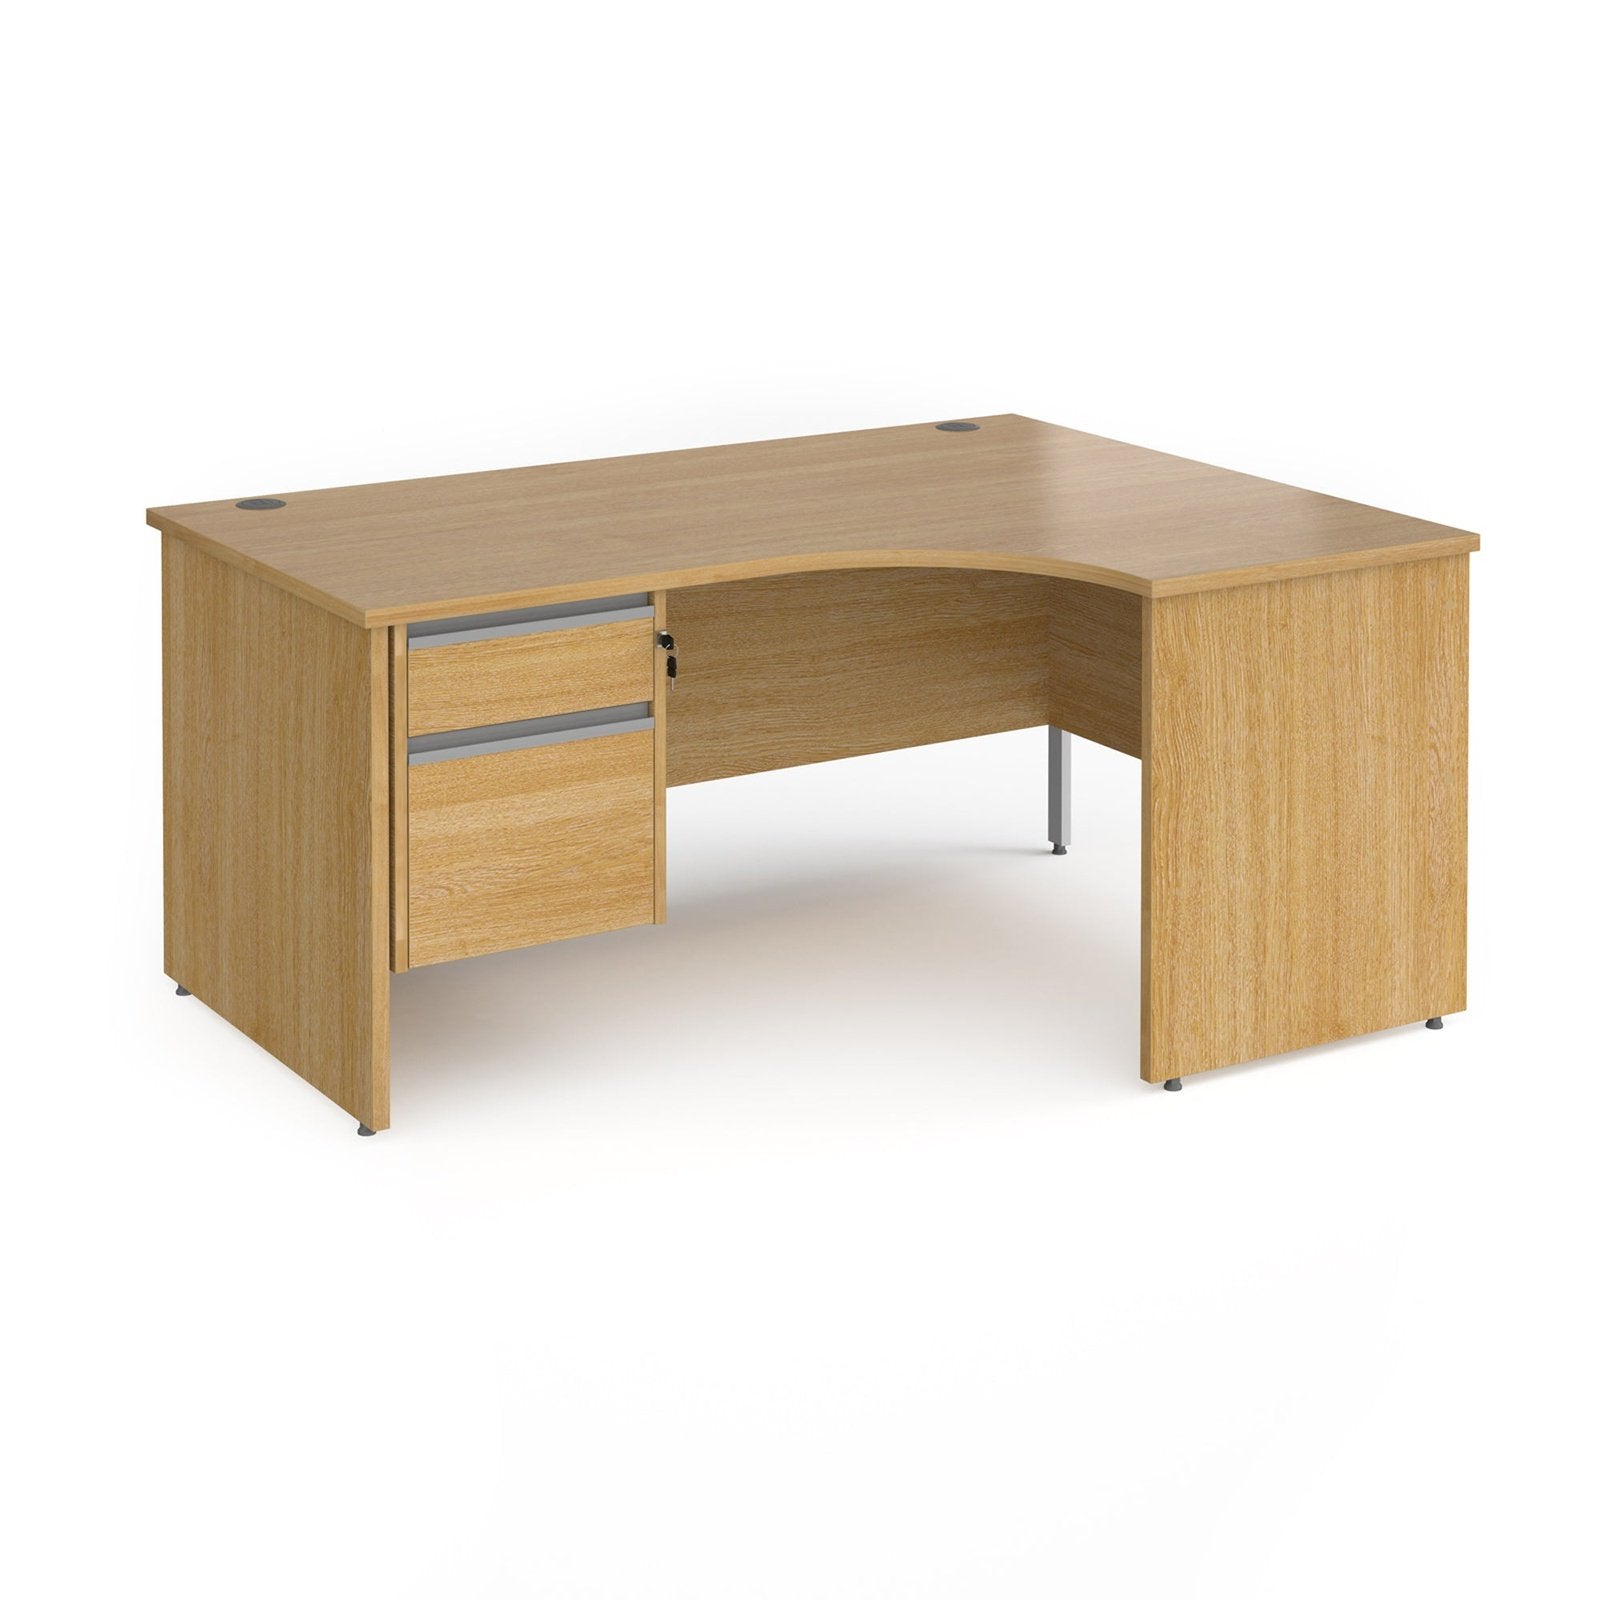 Contract 25 right hand ergonomic desk with 2 drawer pedestal and panel leg - Office Products Online